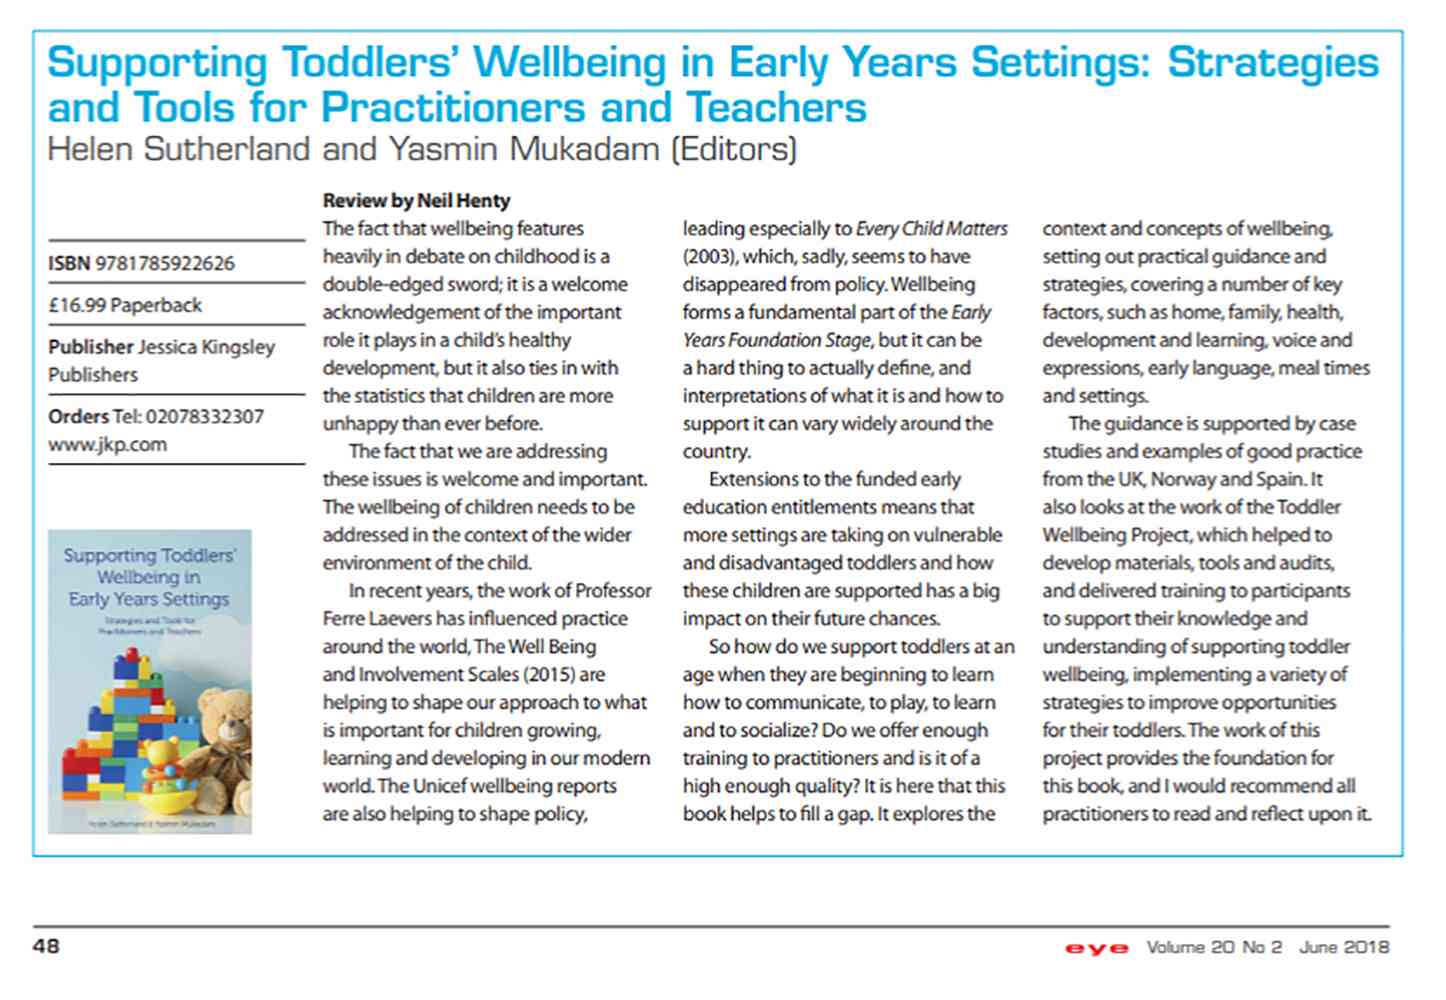 Book Review on Supporting Toddlers' Wellbeing in Early Years Settings: Strategies and Tools for Practitioners and Teachers - Neil Henty reviews Supporting Toddlers' Wellbeing in Early Years Settings: Strategies and Tools for Practitioners and Teachers in the Early Years Educator June 2018.